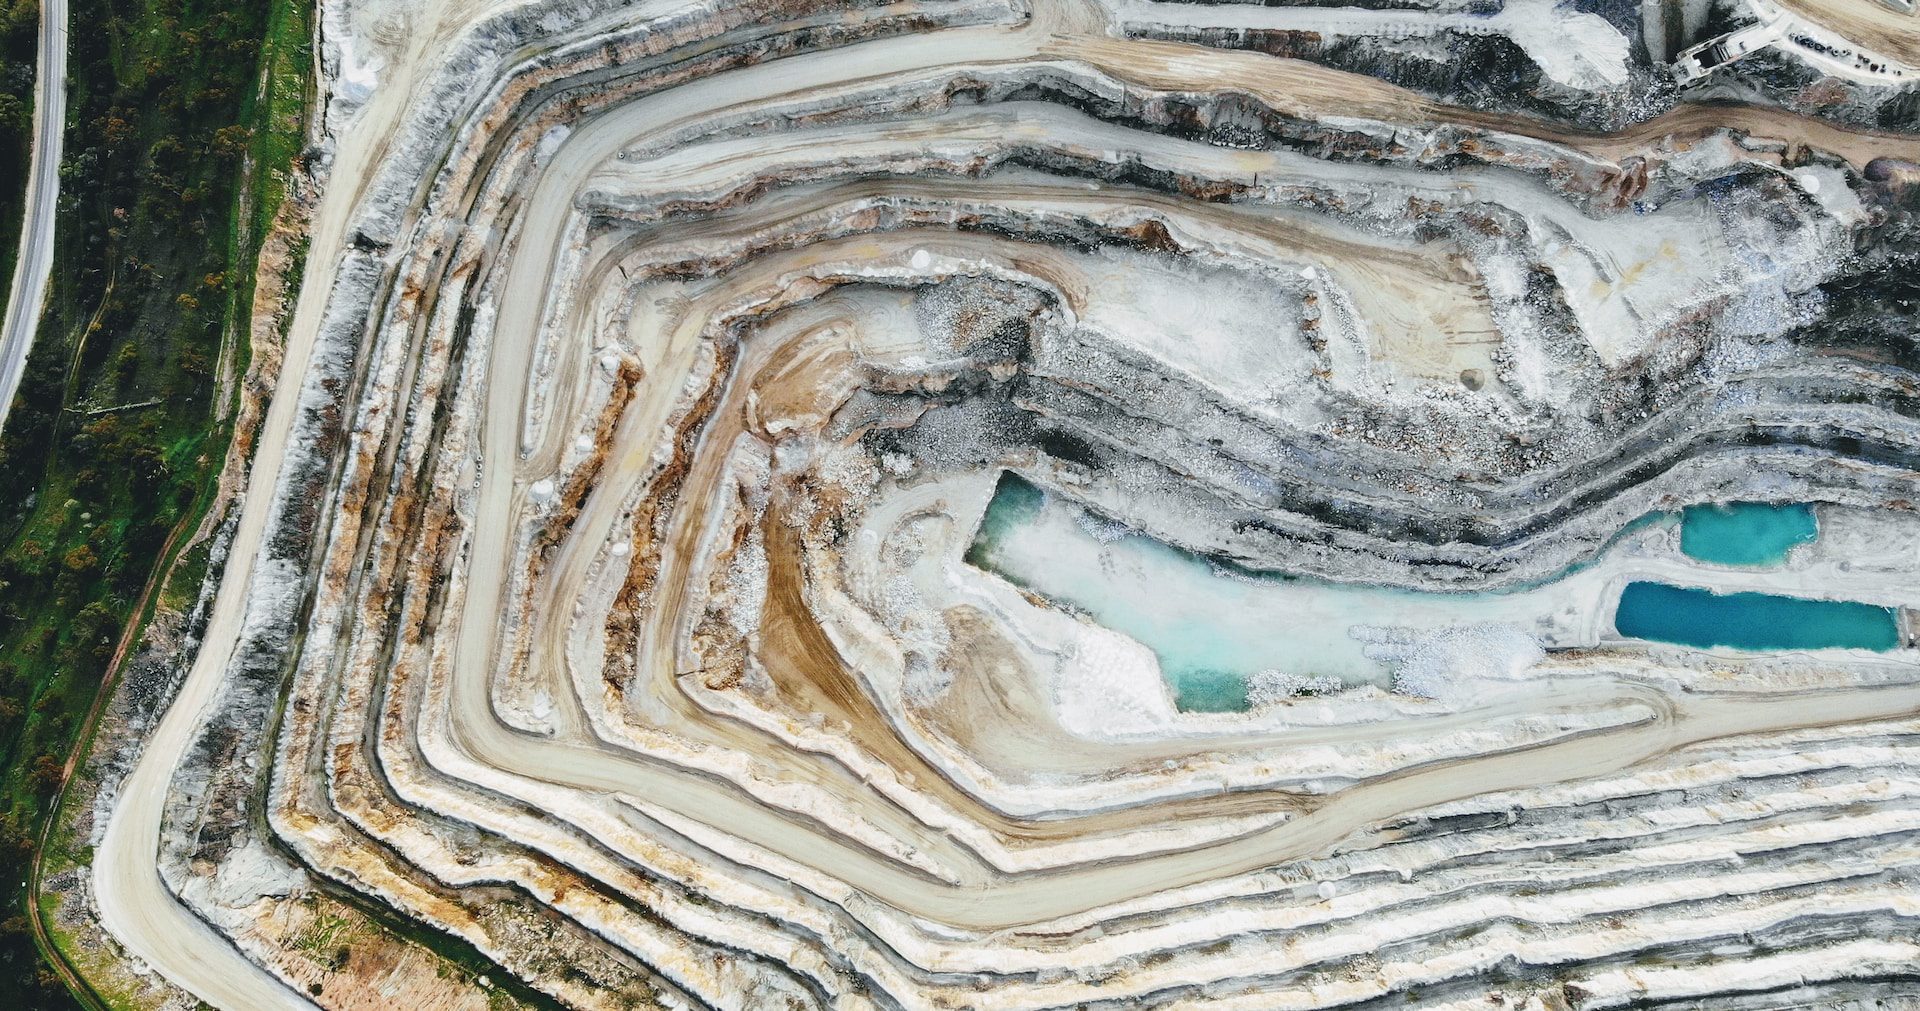 Image of rock landscape which looks like crystals